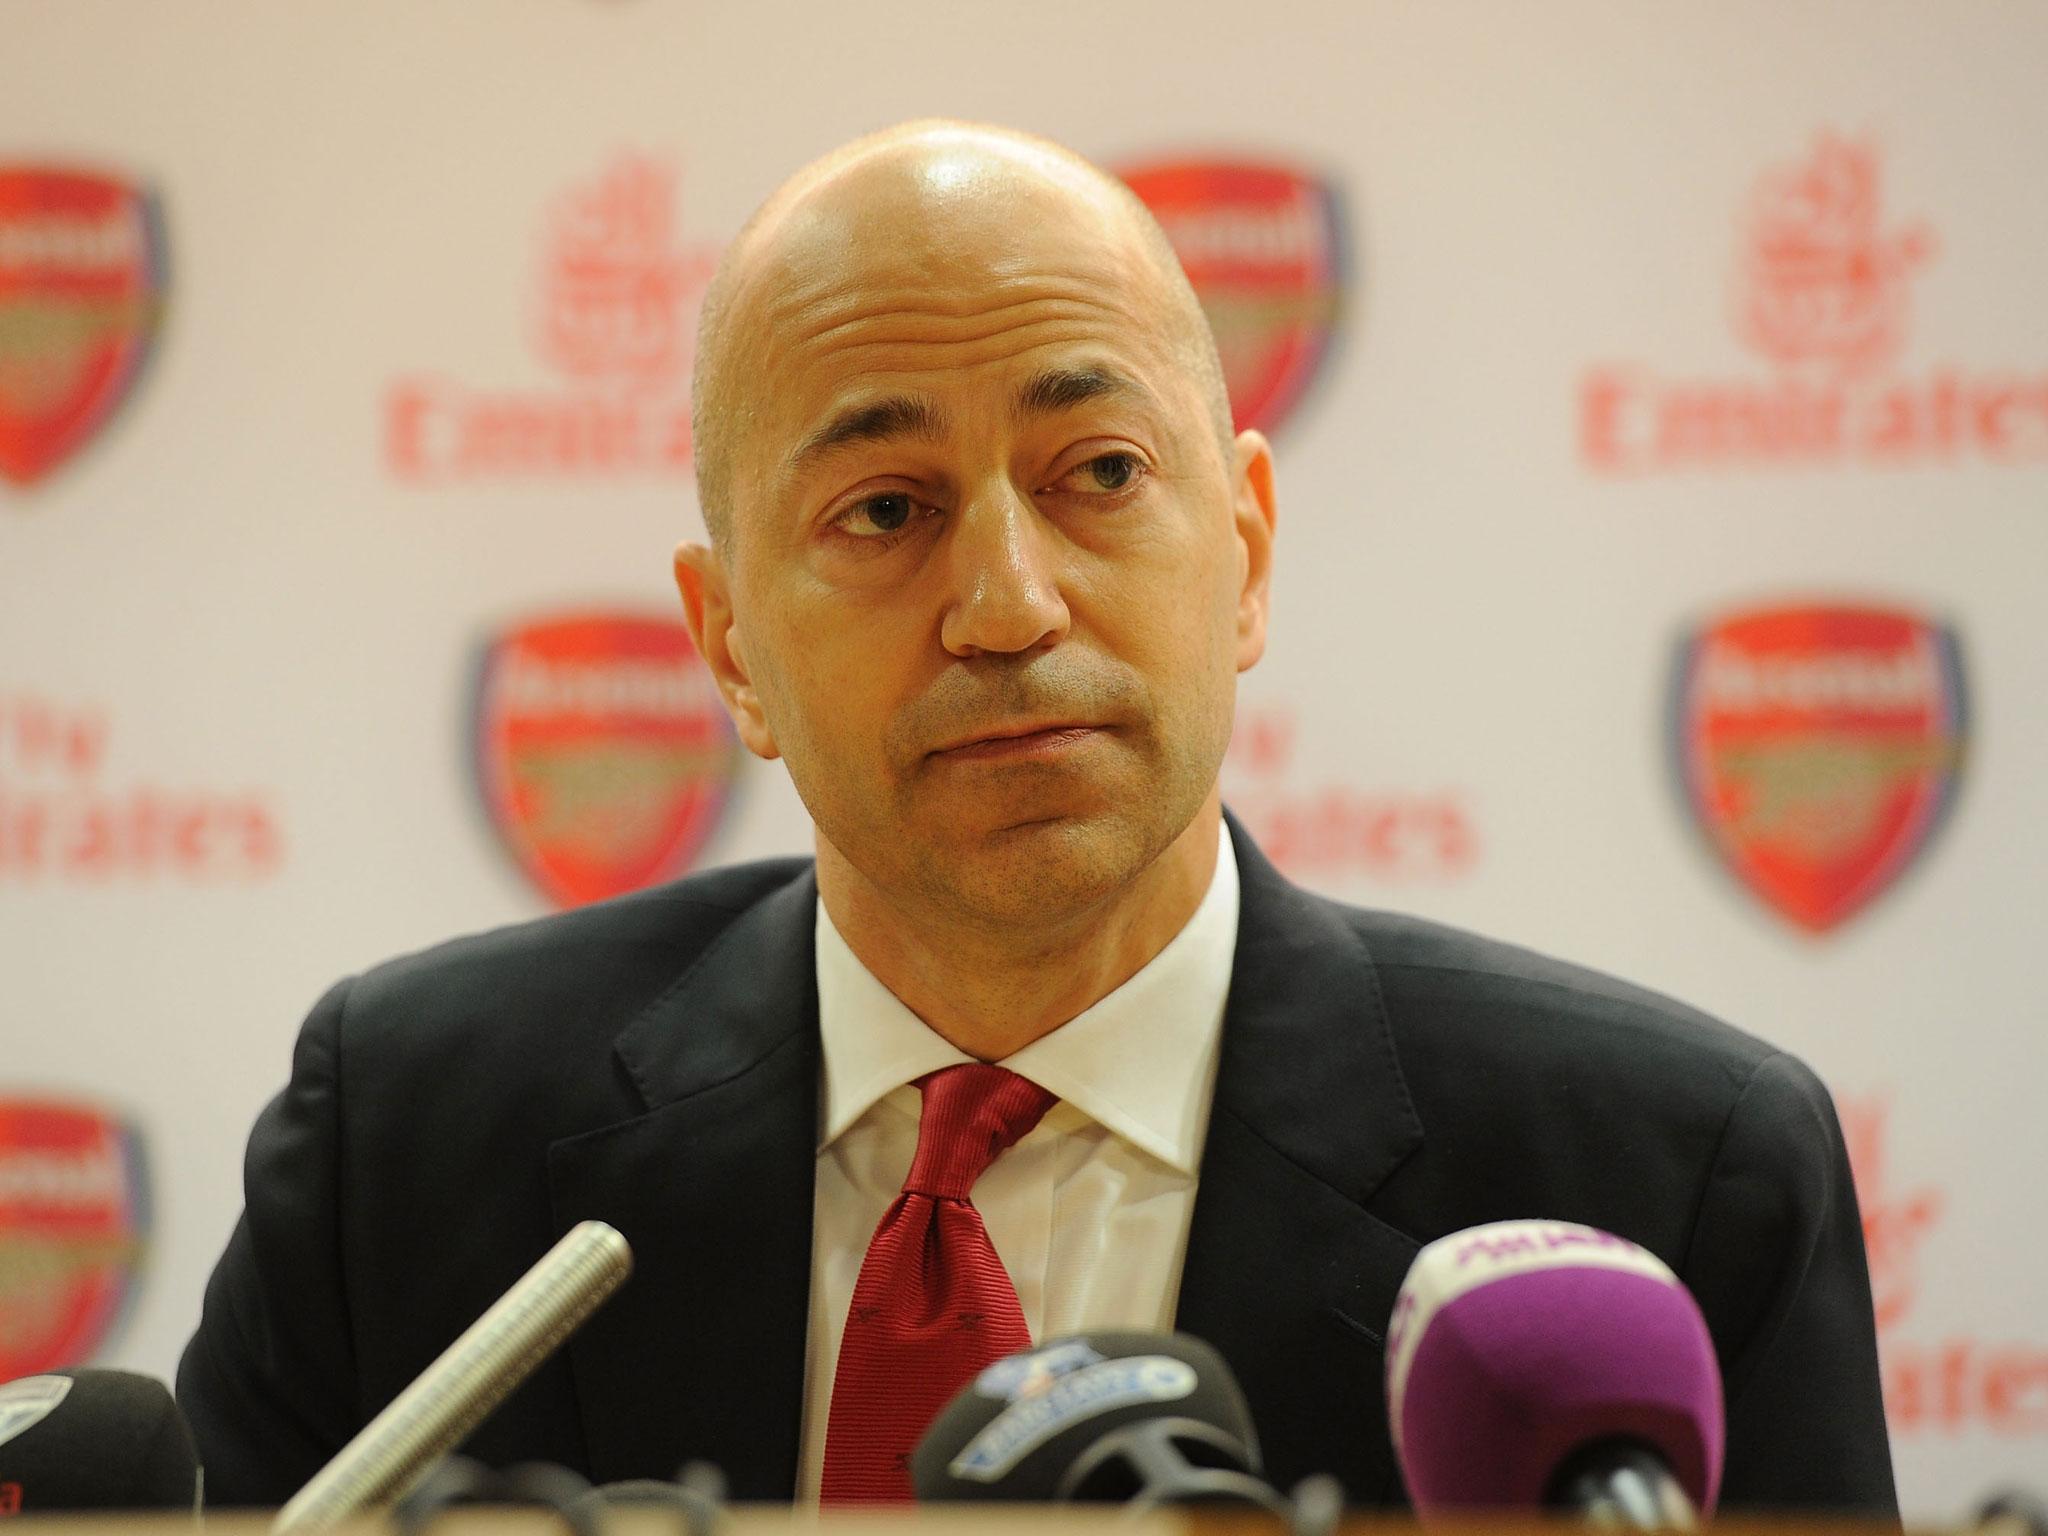 Ivan Gazidis: Chief executive says club have 'exciting' new revenue streams coming in